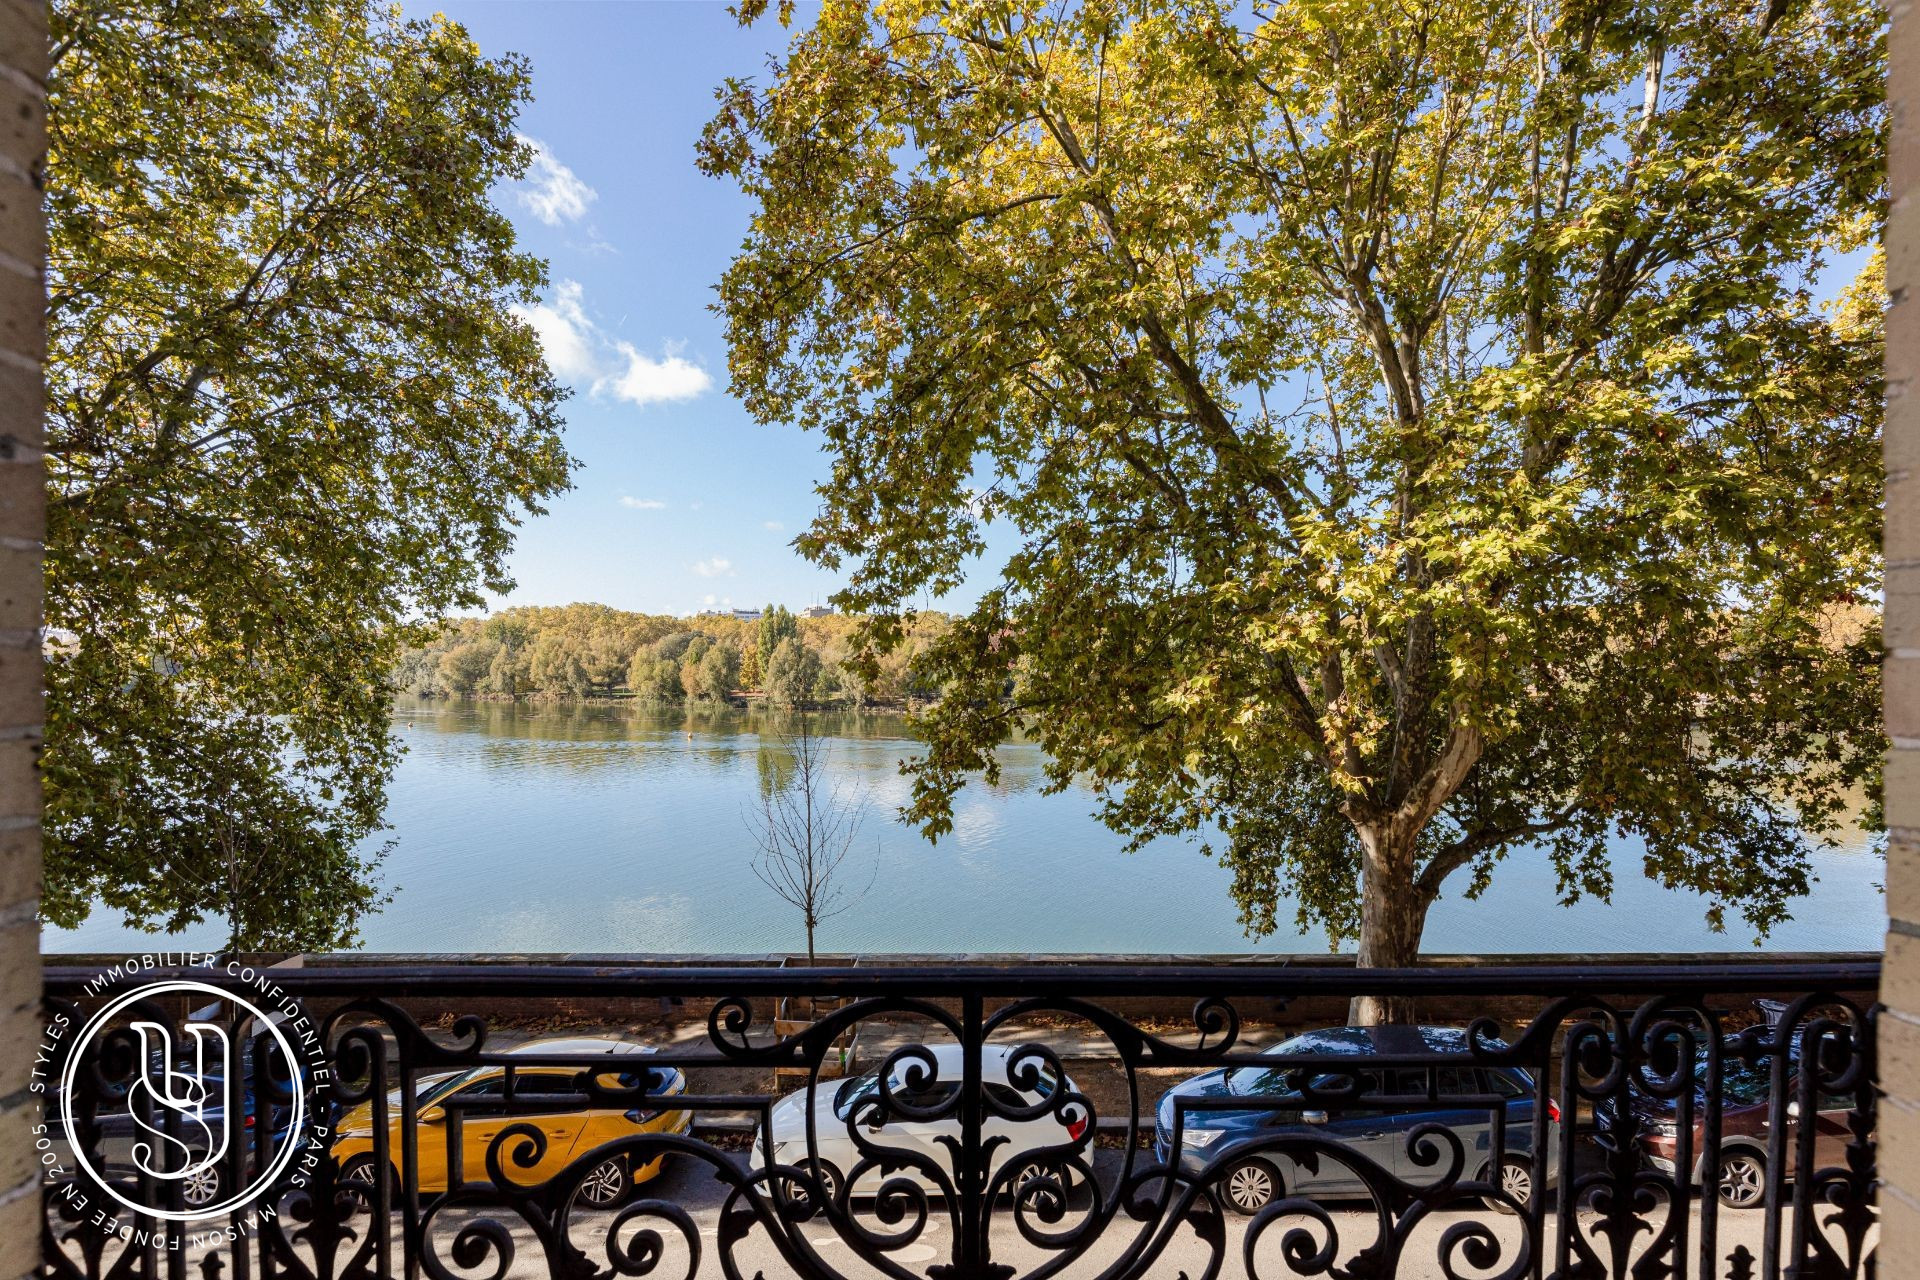 Toulouse - Under offer, a beautiful family flat with views ... - image 1